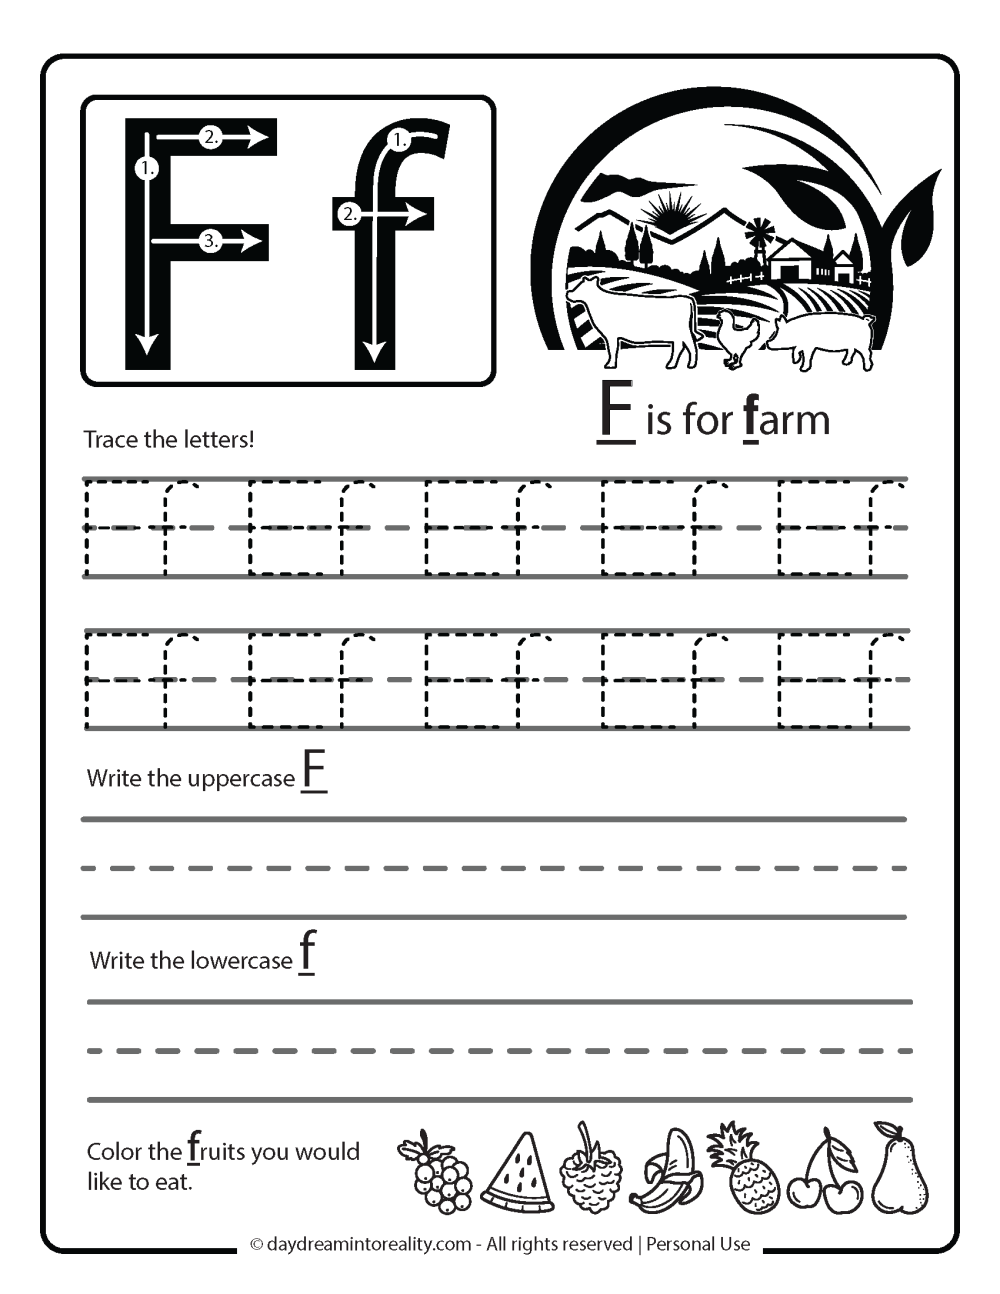 Letter F Free Printable. F is for Farm worksheet.